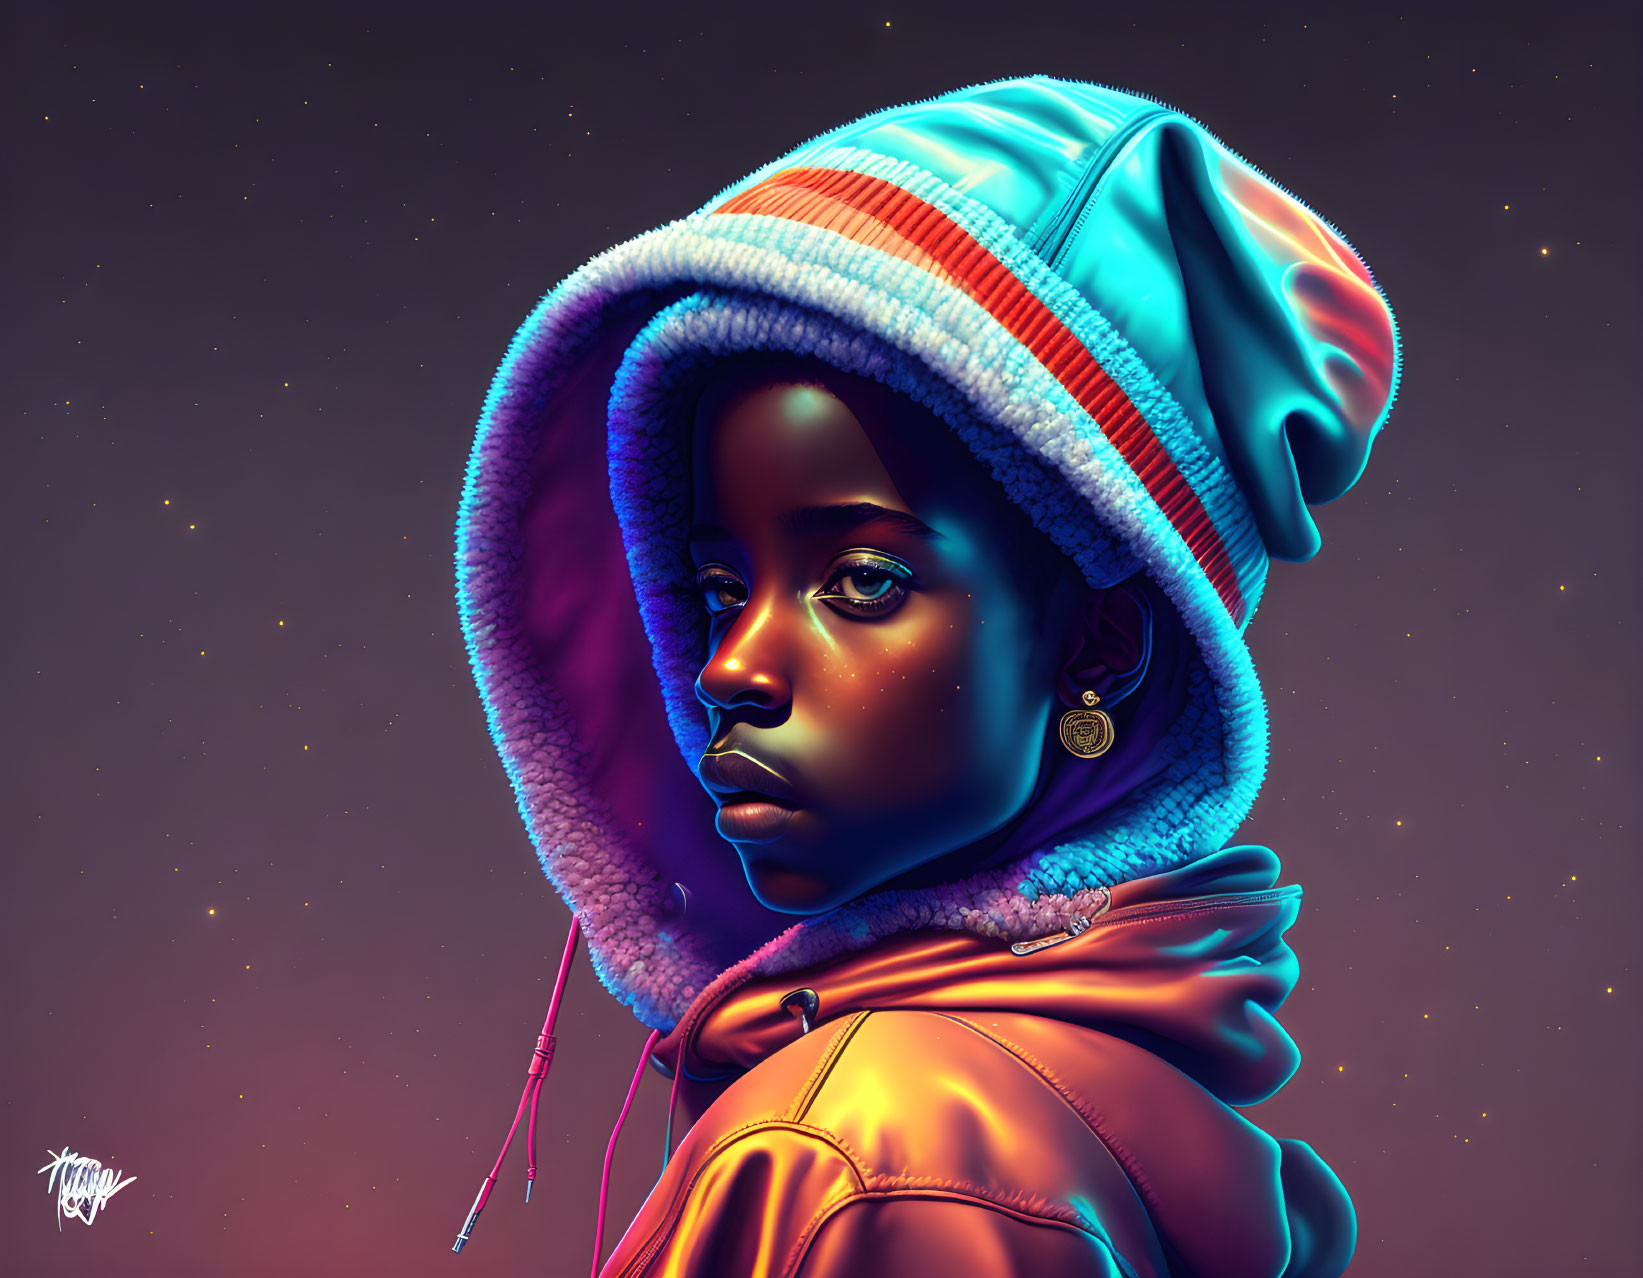 Digital Illustration of Young Person in Blue and Orange Hoodie Under Starry Night Sky